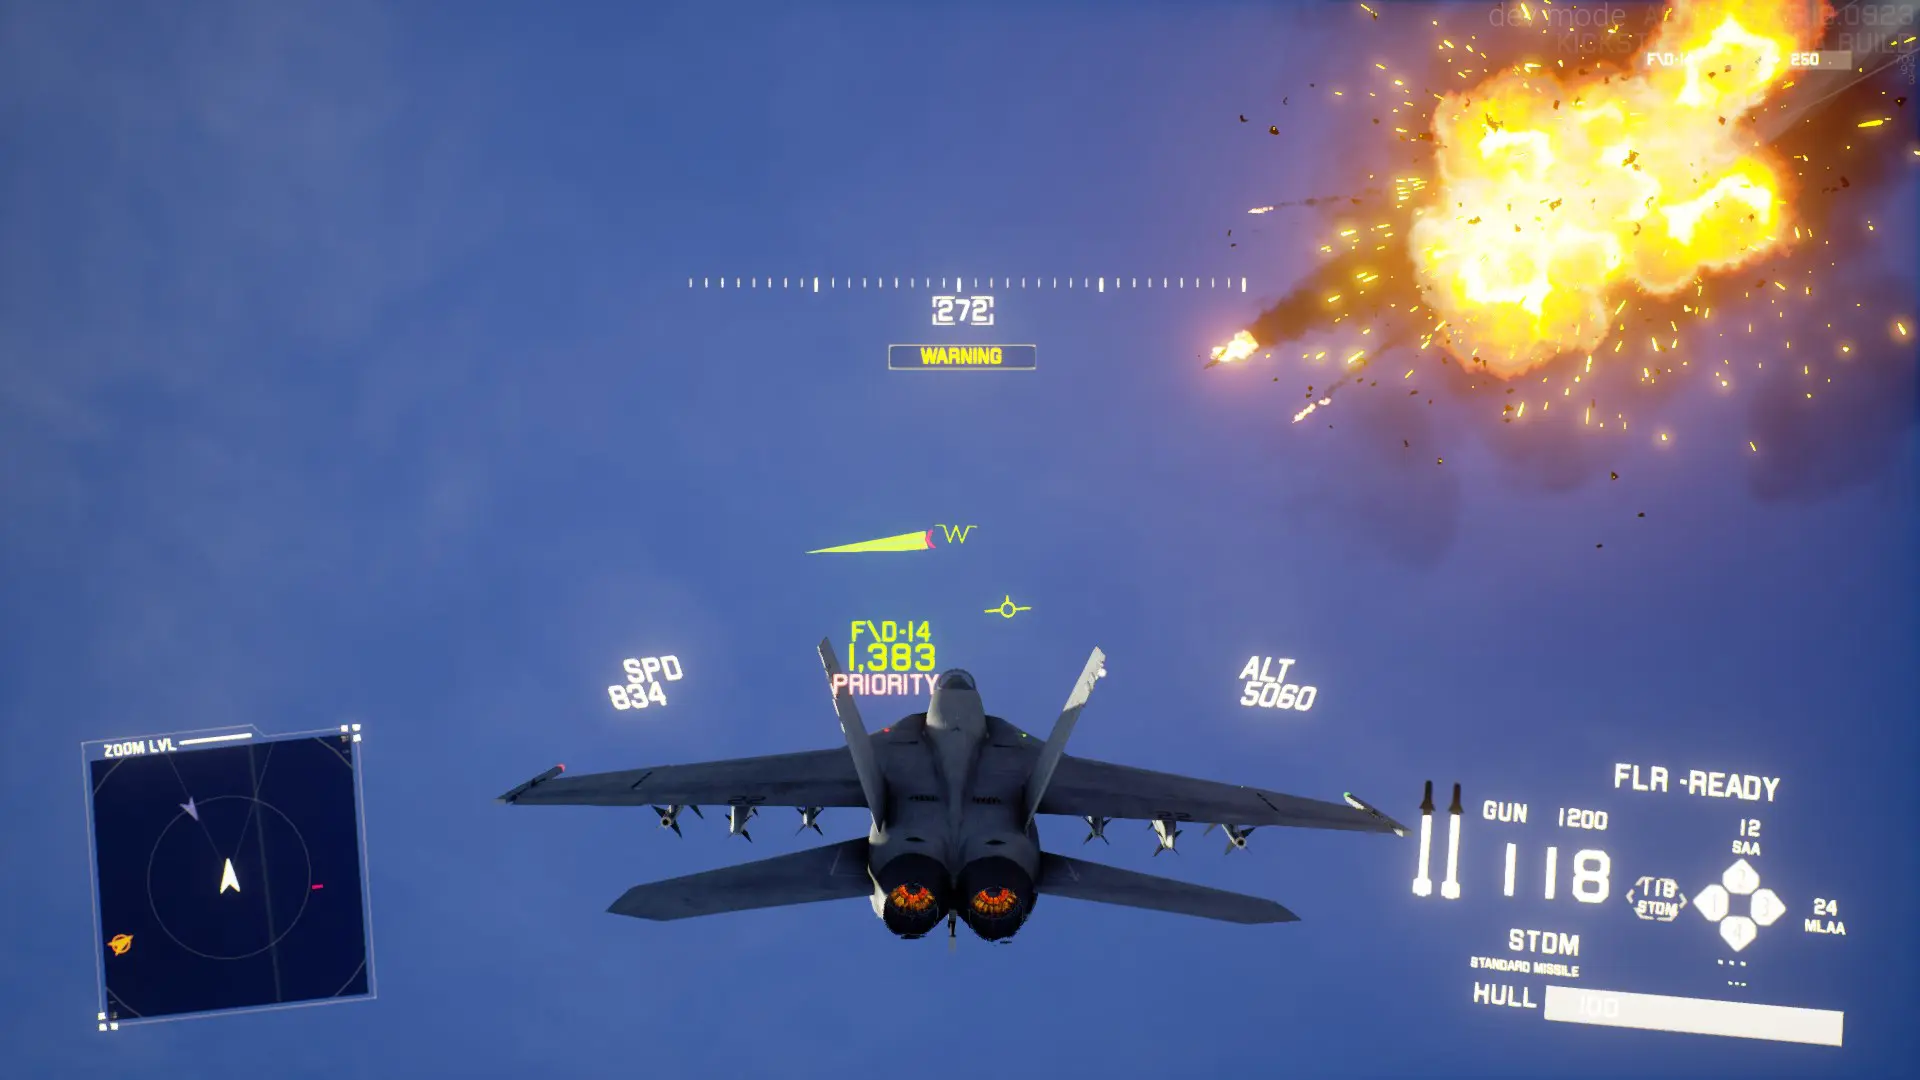 download project wingman game for free